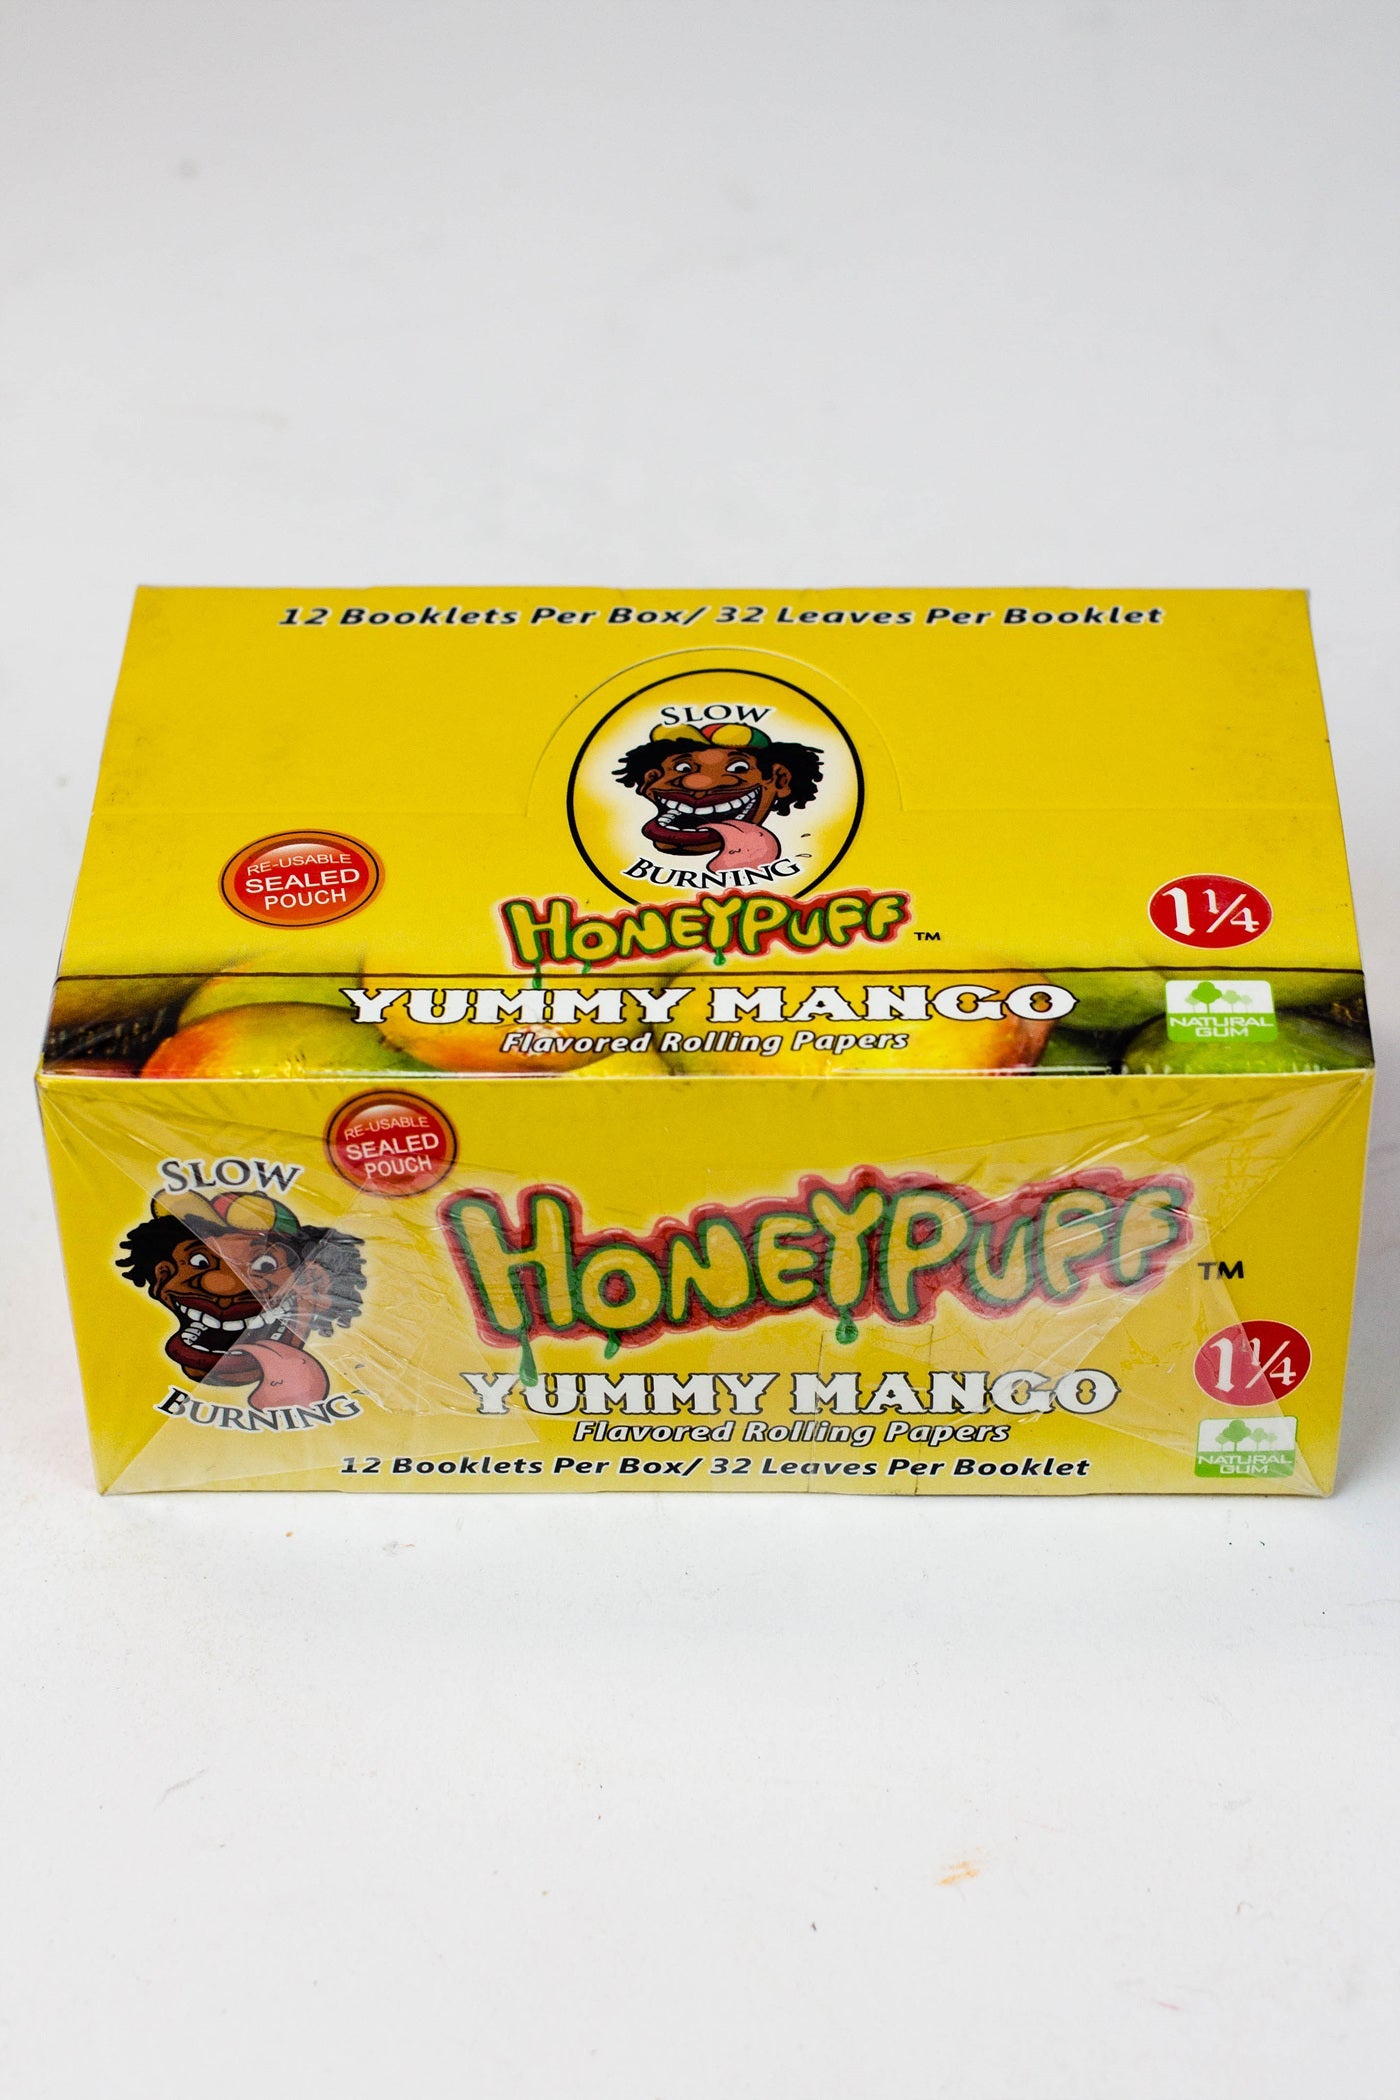 HONEYPUFF 1 1/4 FRUIT FLAVORED ROLLING PAPERS_7